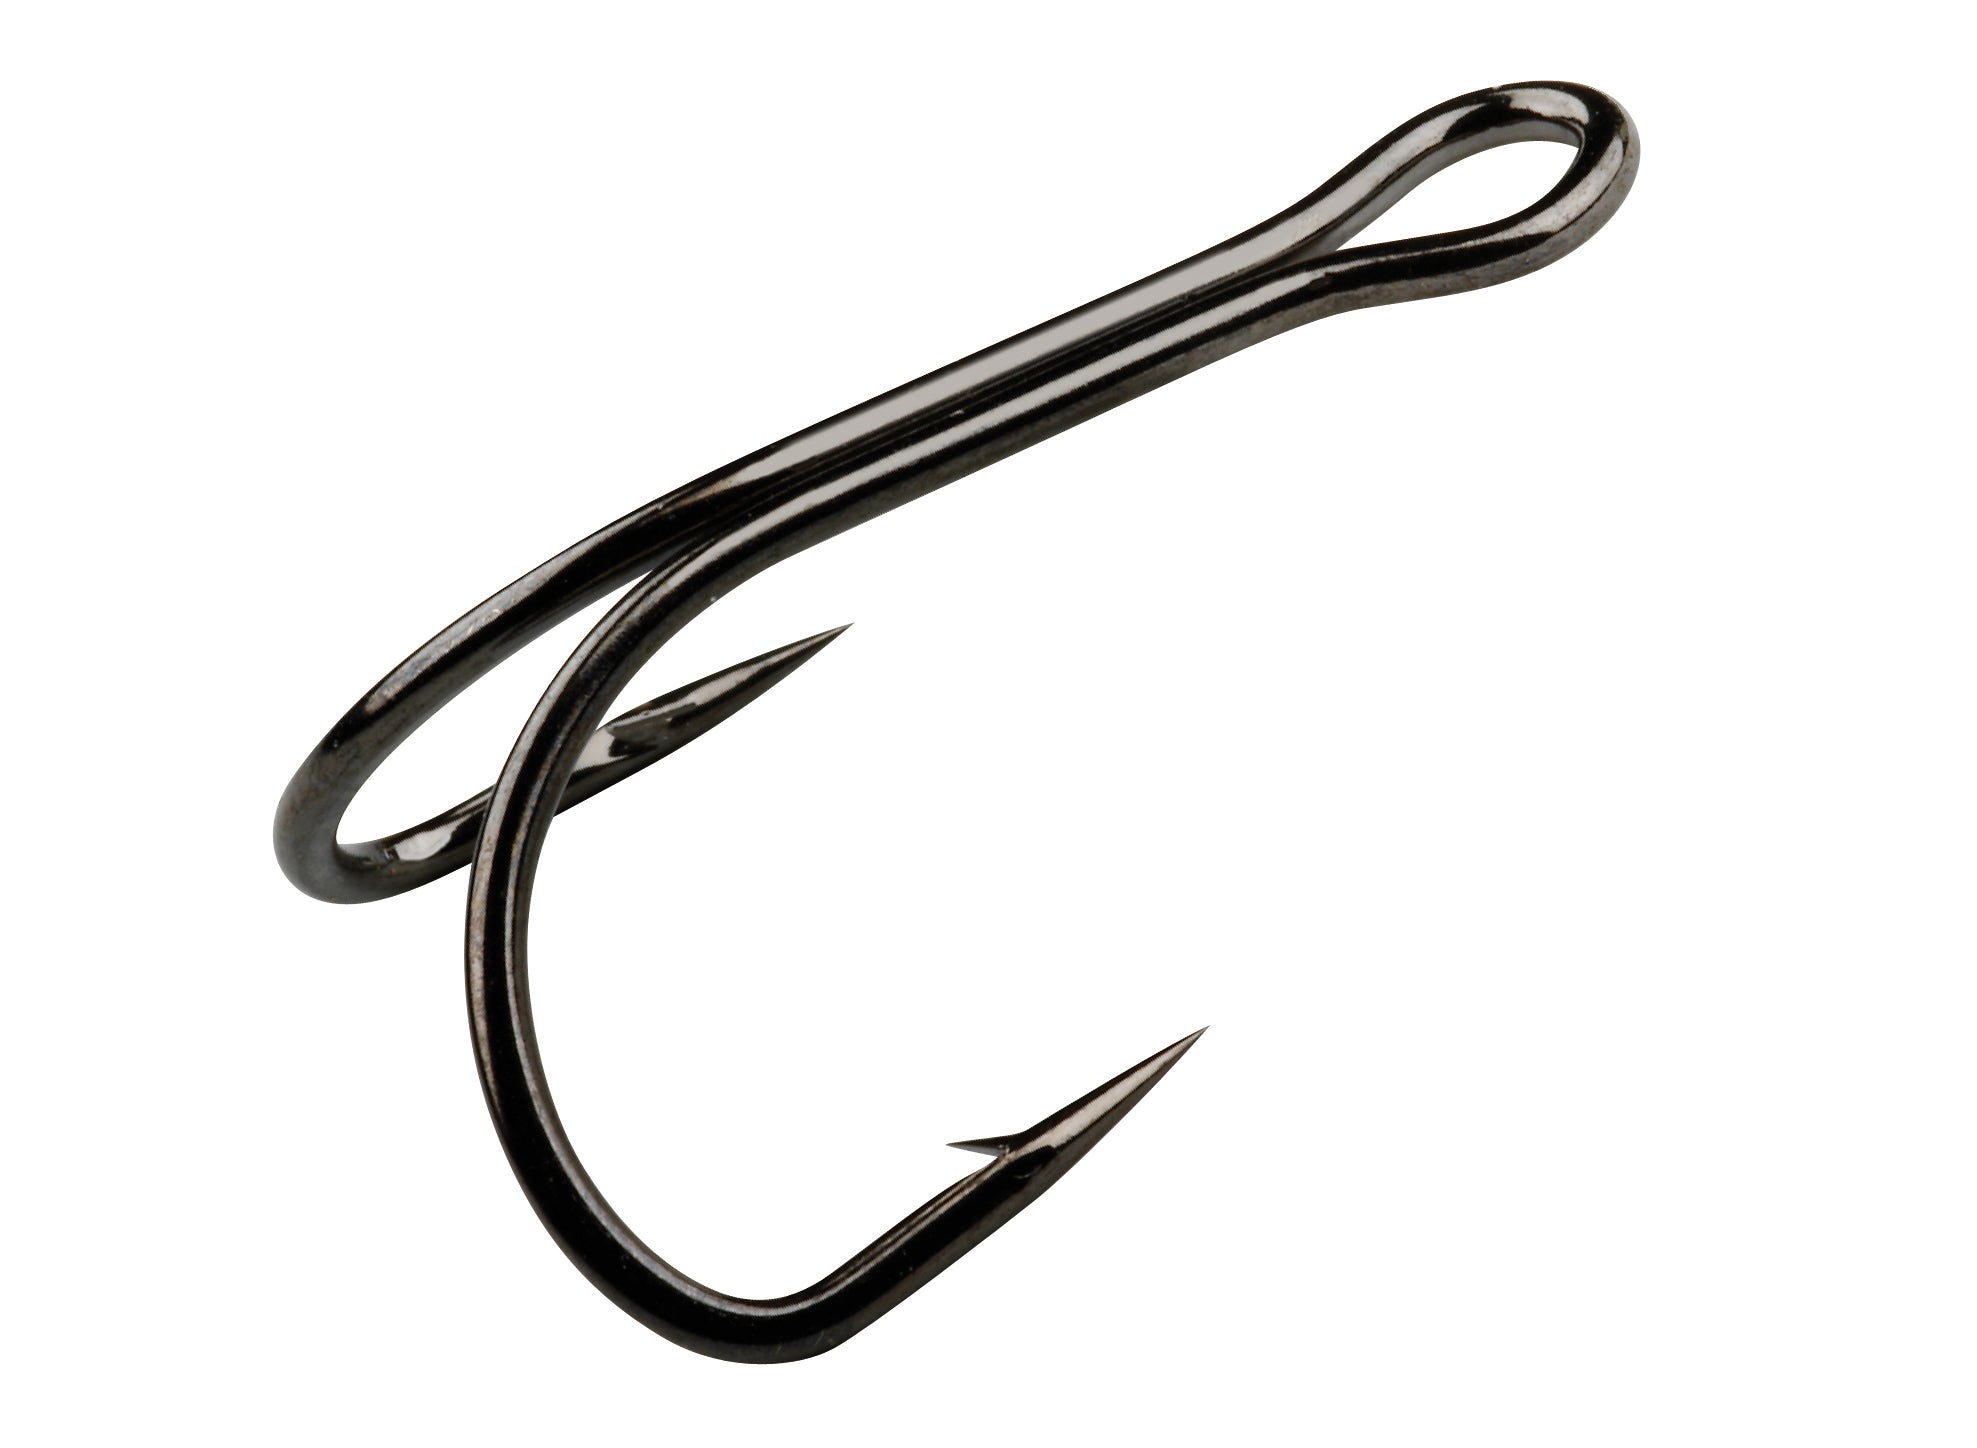 Gamakatsu Worm Offset EWG with Silicon Stopper NS Black Hooks for lures